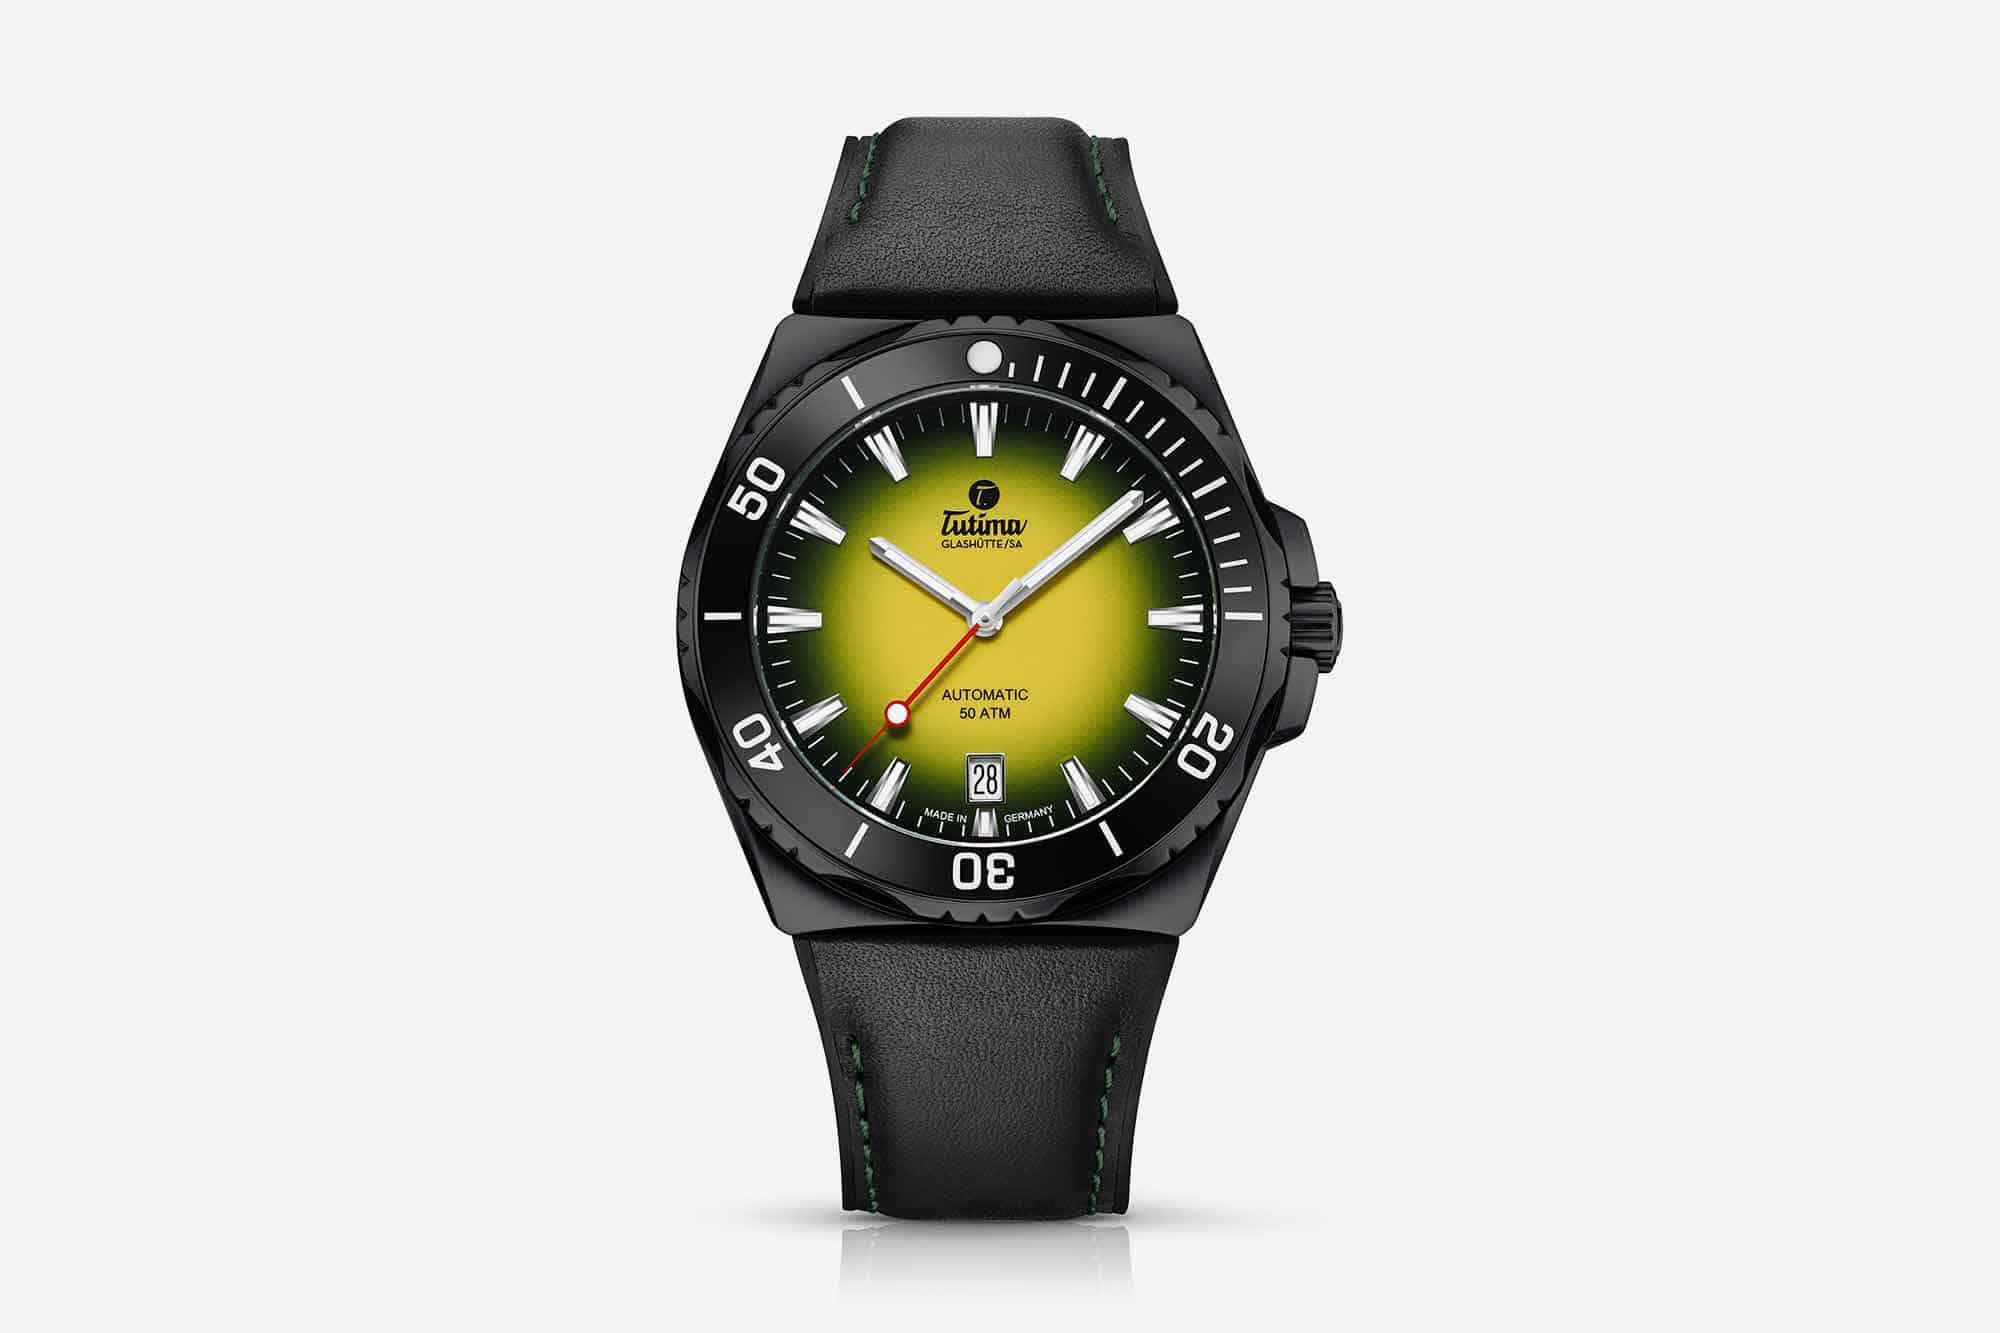 Tutima Introduces the M2 Seven Seas in a Yellow-Green Dial and PVD Coated Case